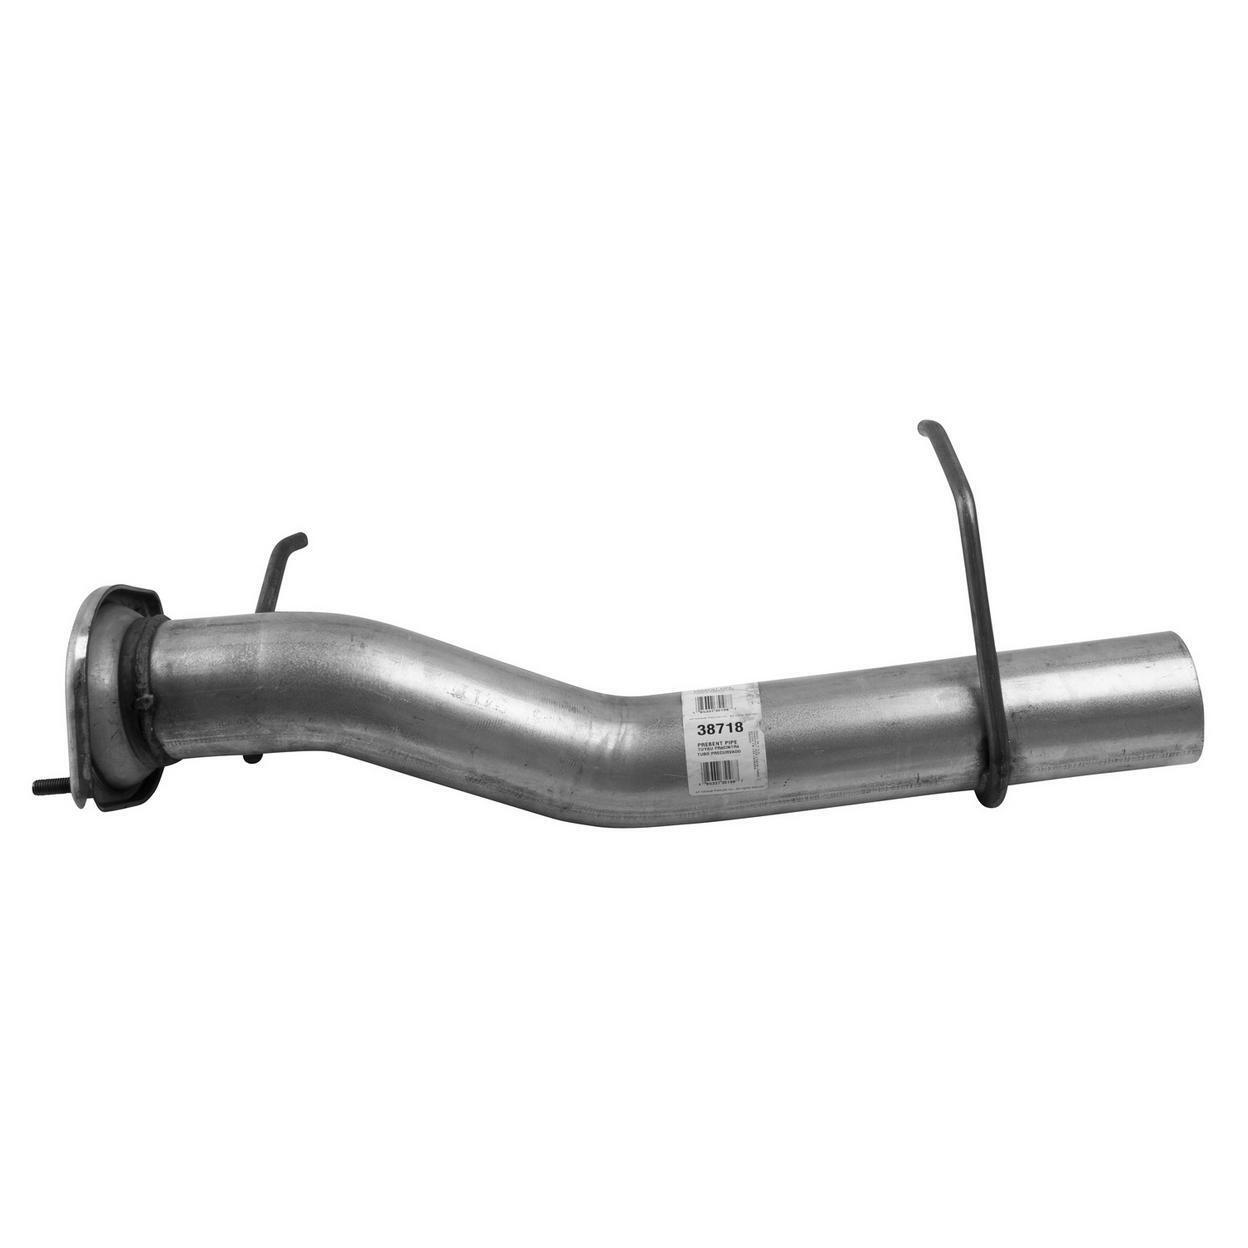 38718-AX Exhaust Pipe Fits 2015-2017 GMC Sierra 2500 HD 6.0L V8 CNG OHV